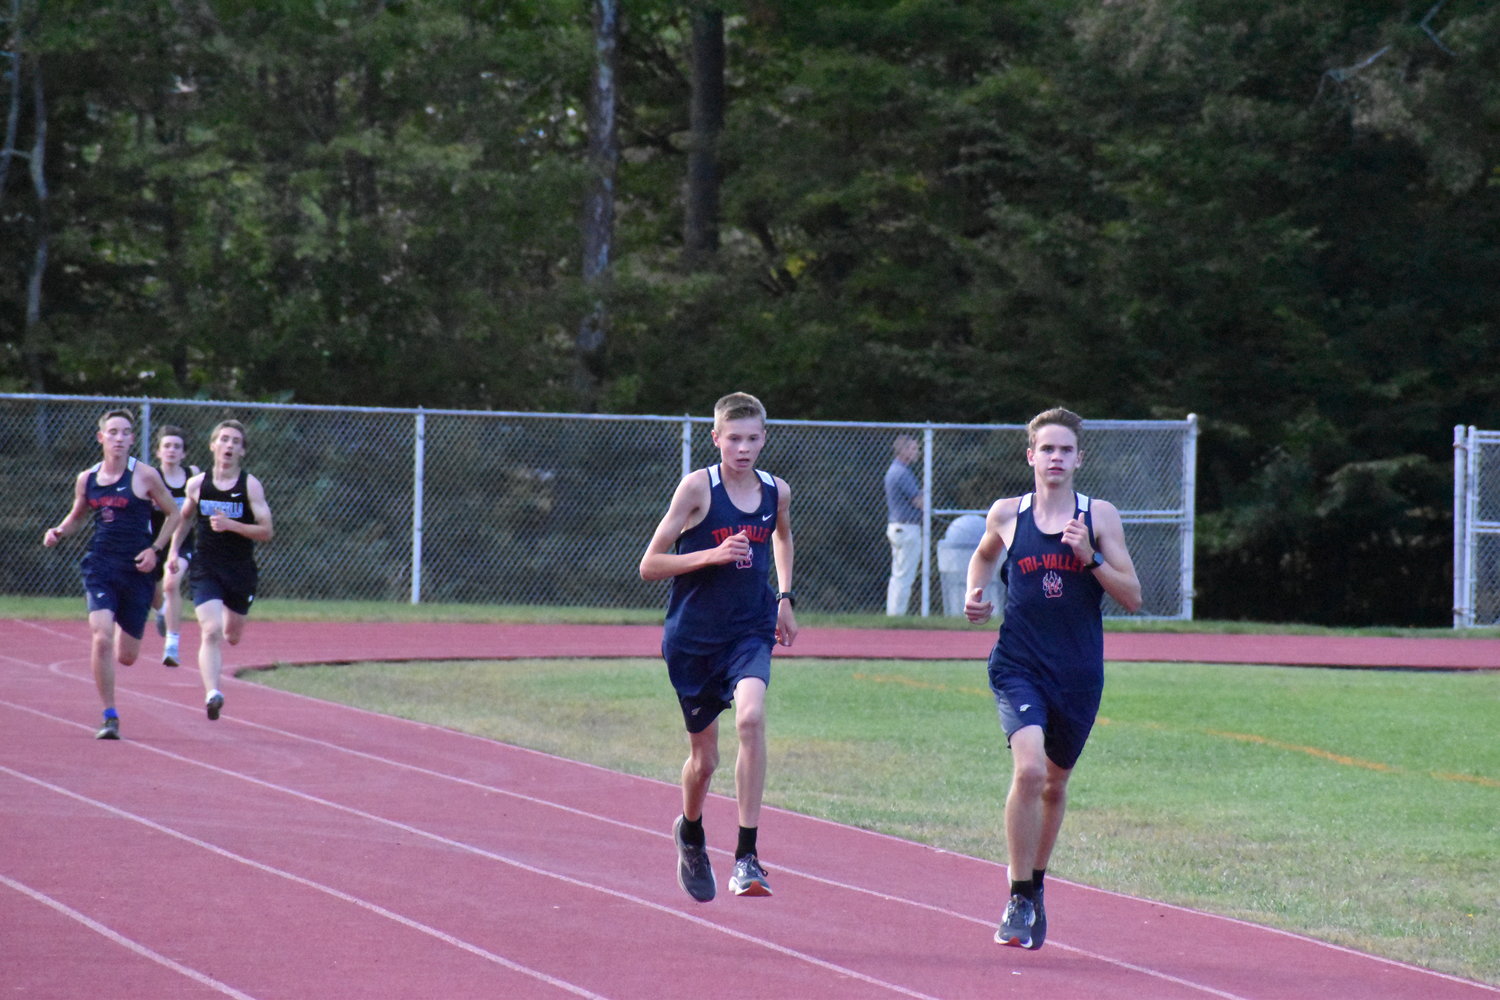 Craig Costa (19:06) and Van Furman (19:07) finished second and third, 40 seconds behind Adam Furman (18:24) on Wednesday.